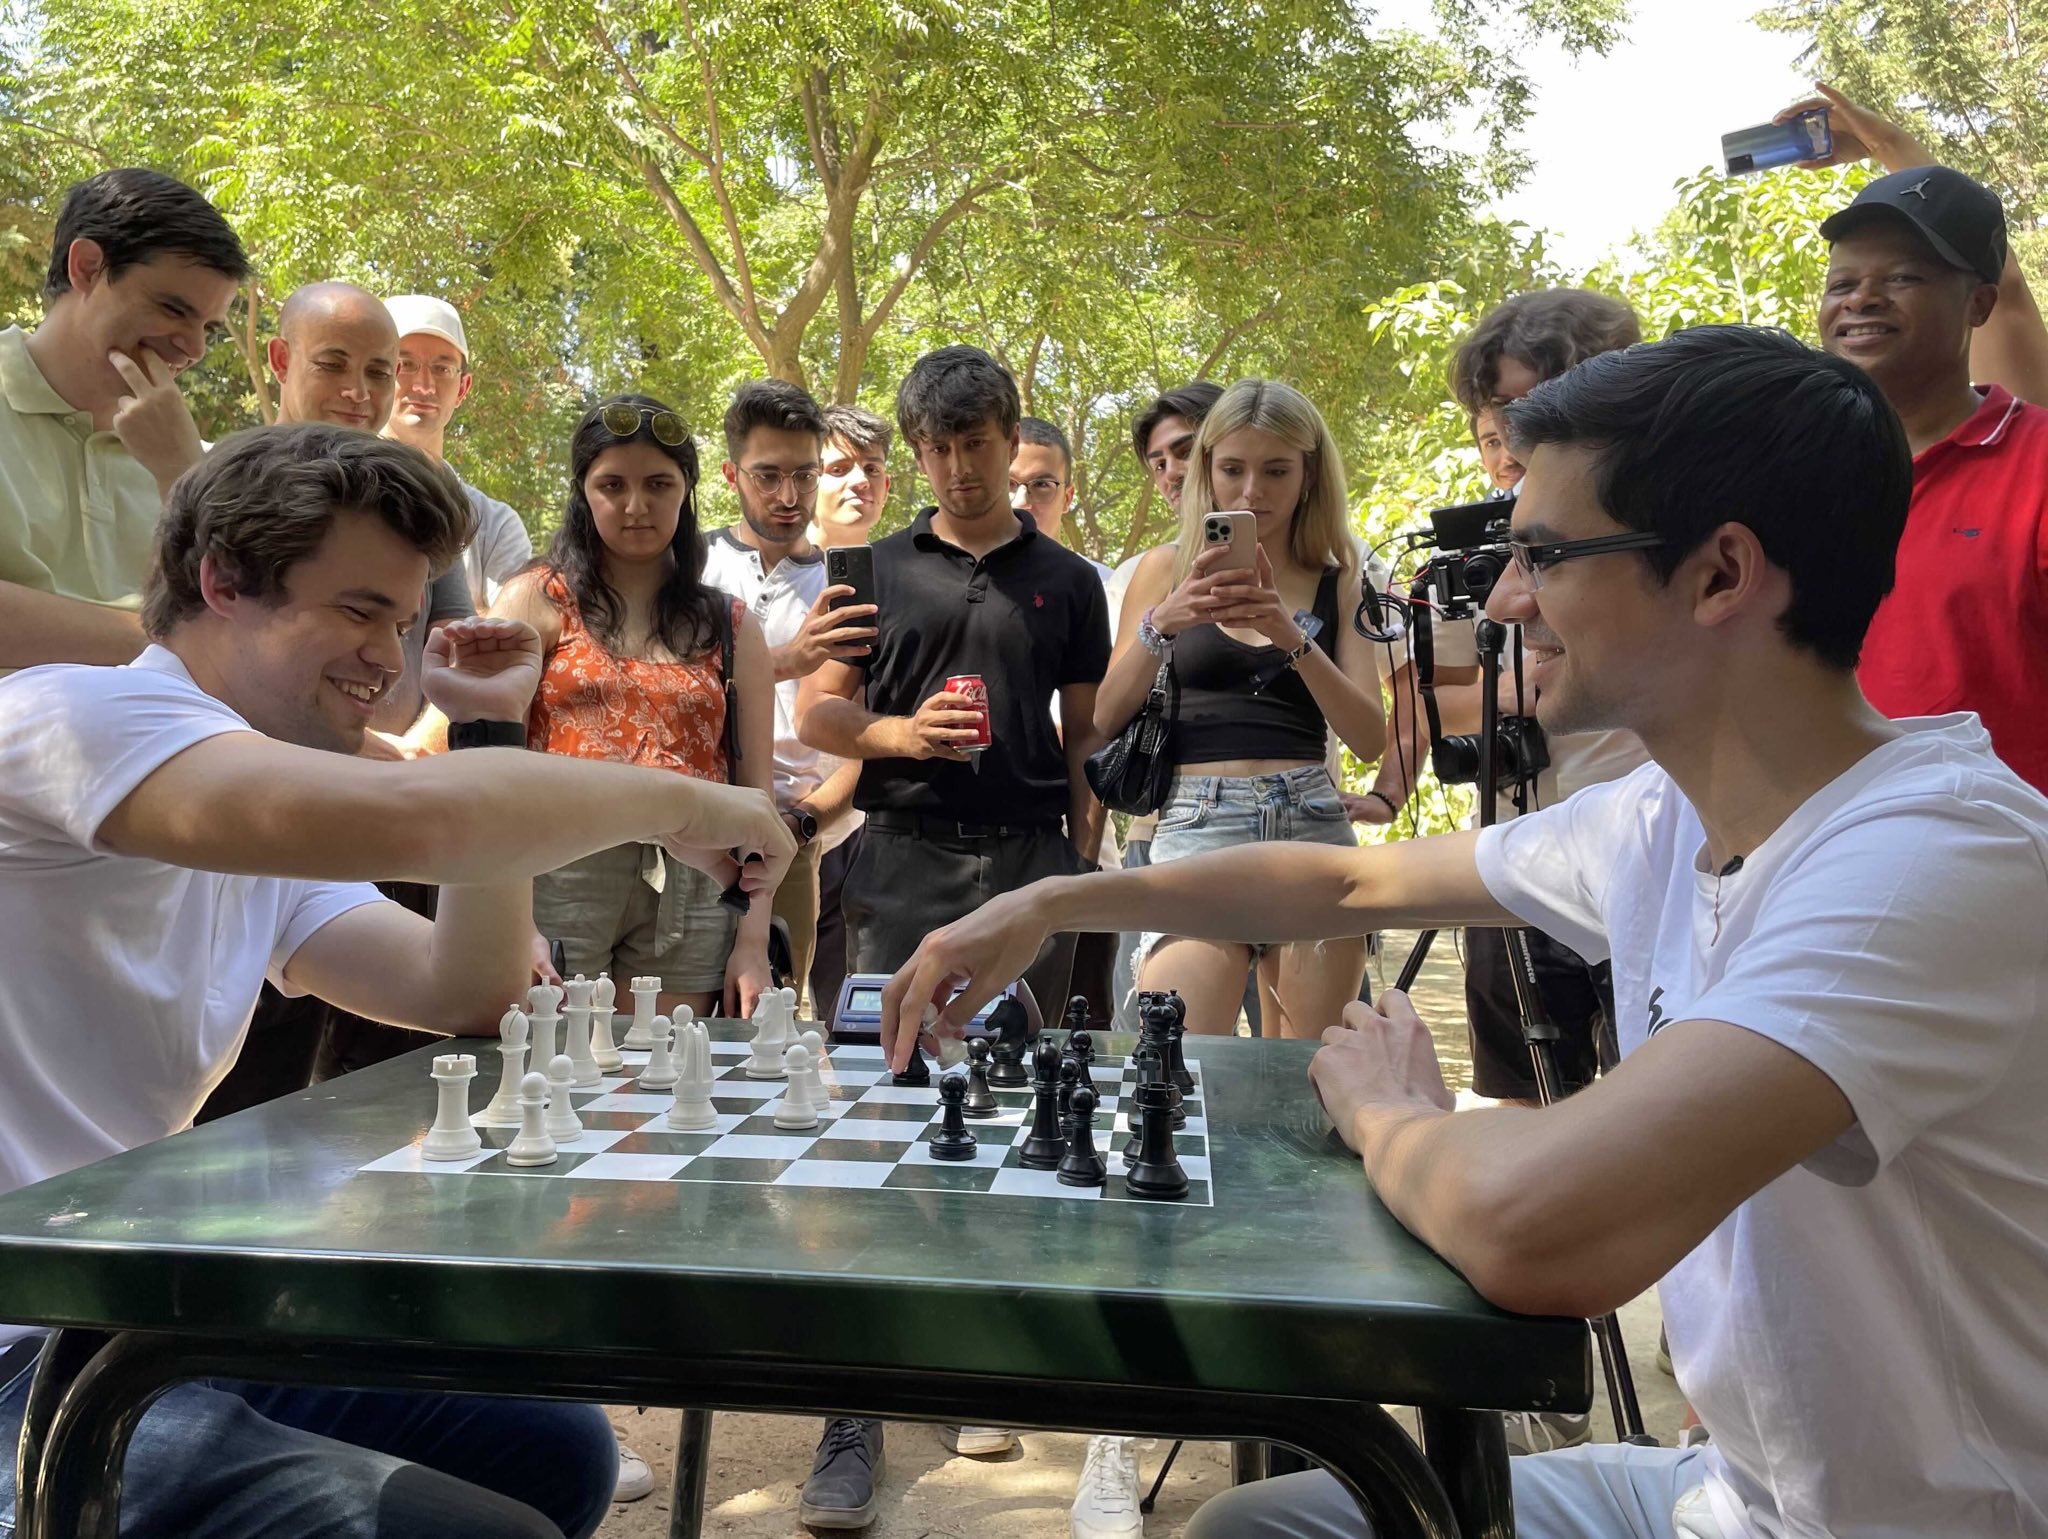 Chessable - Where Science Meets Chess